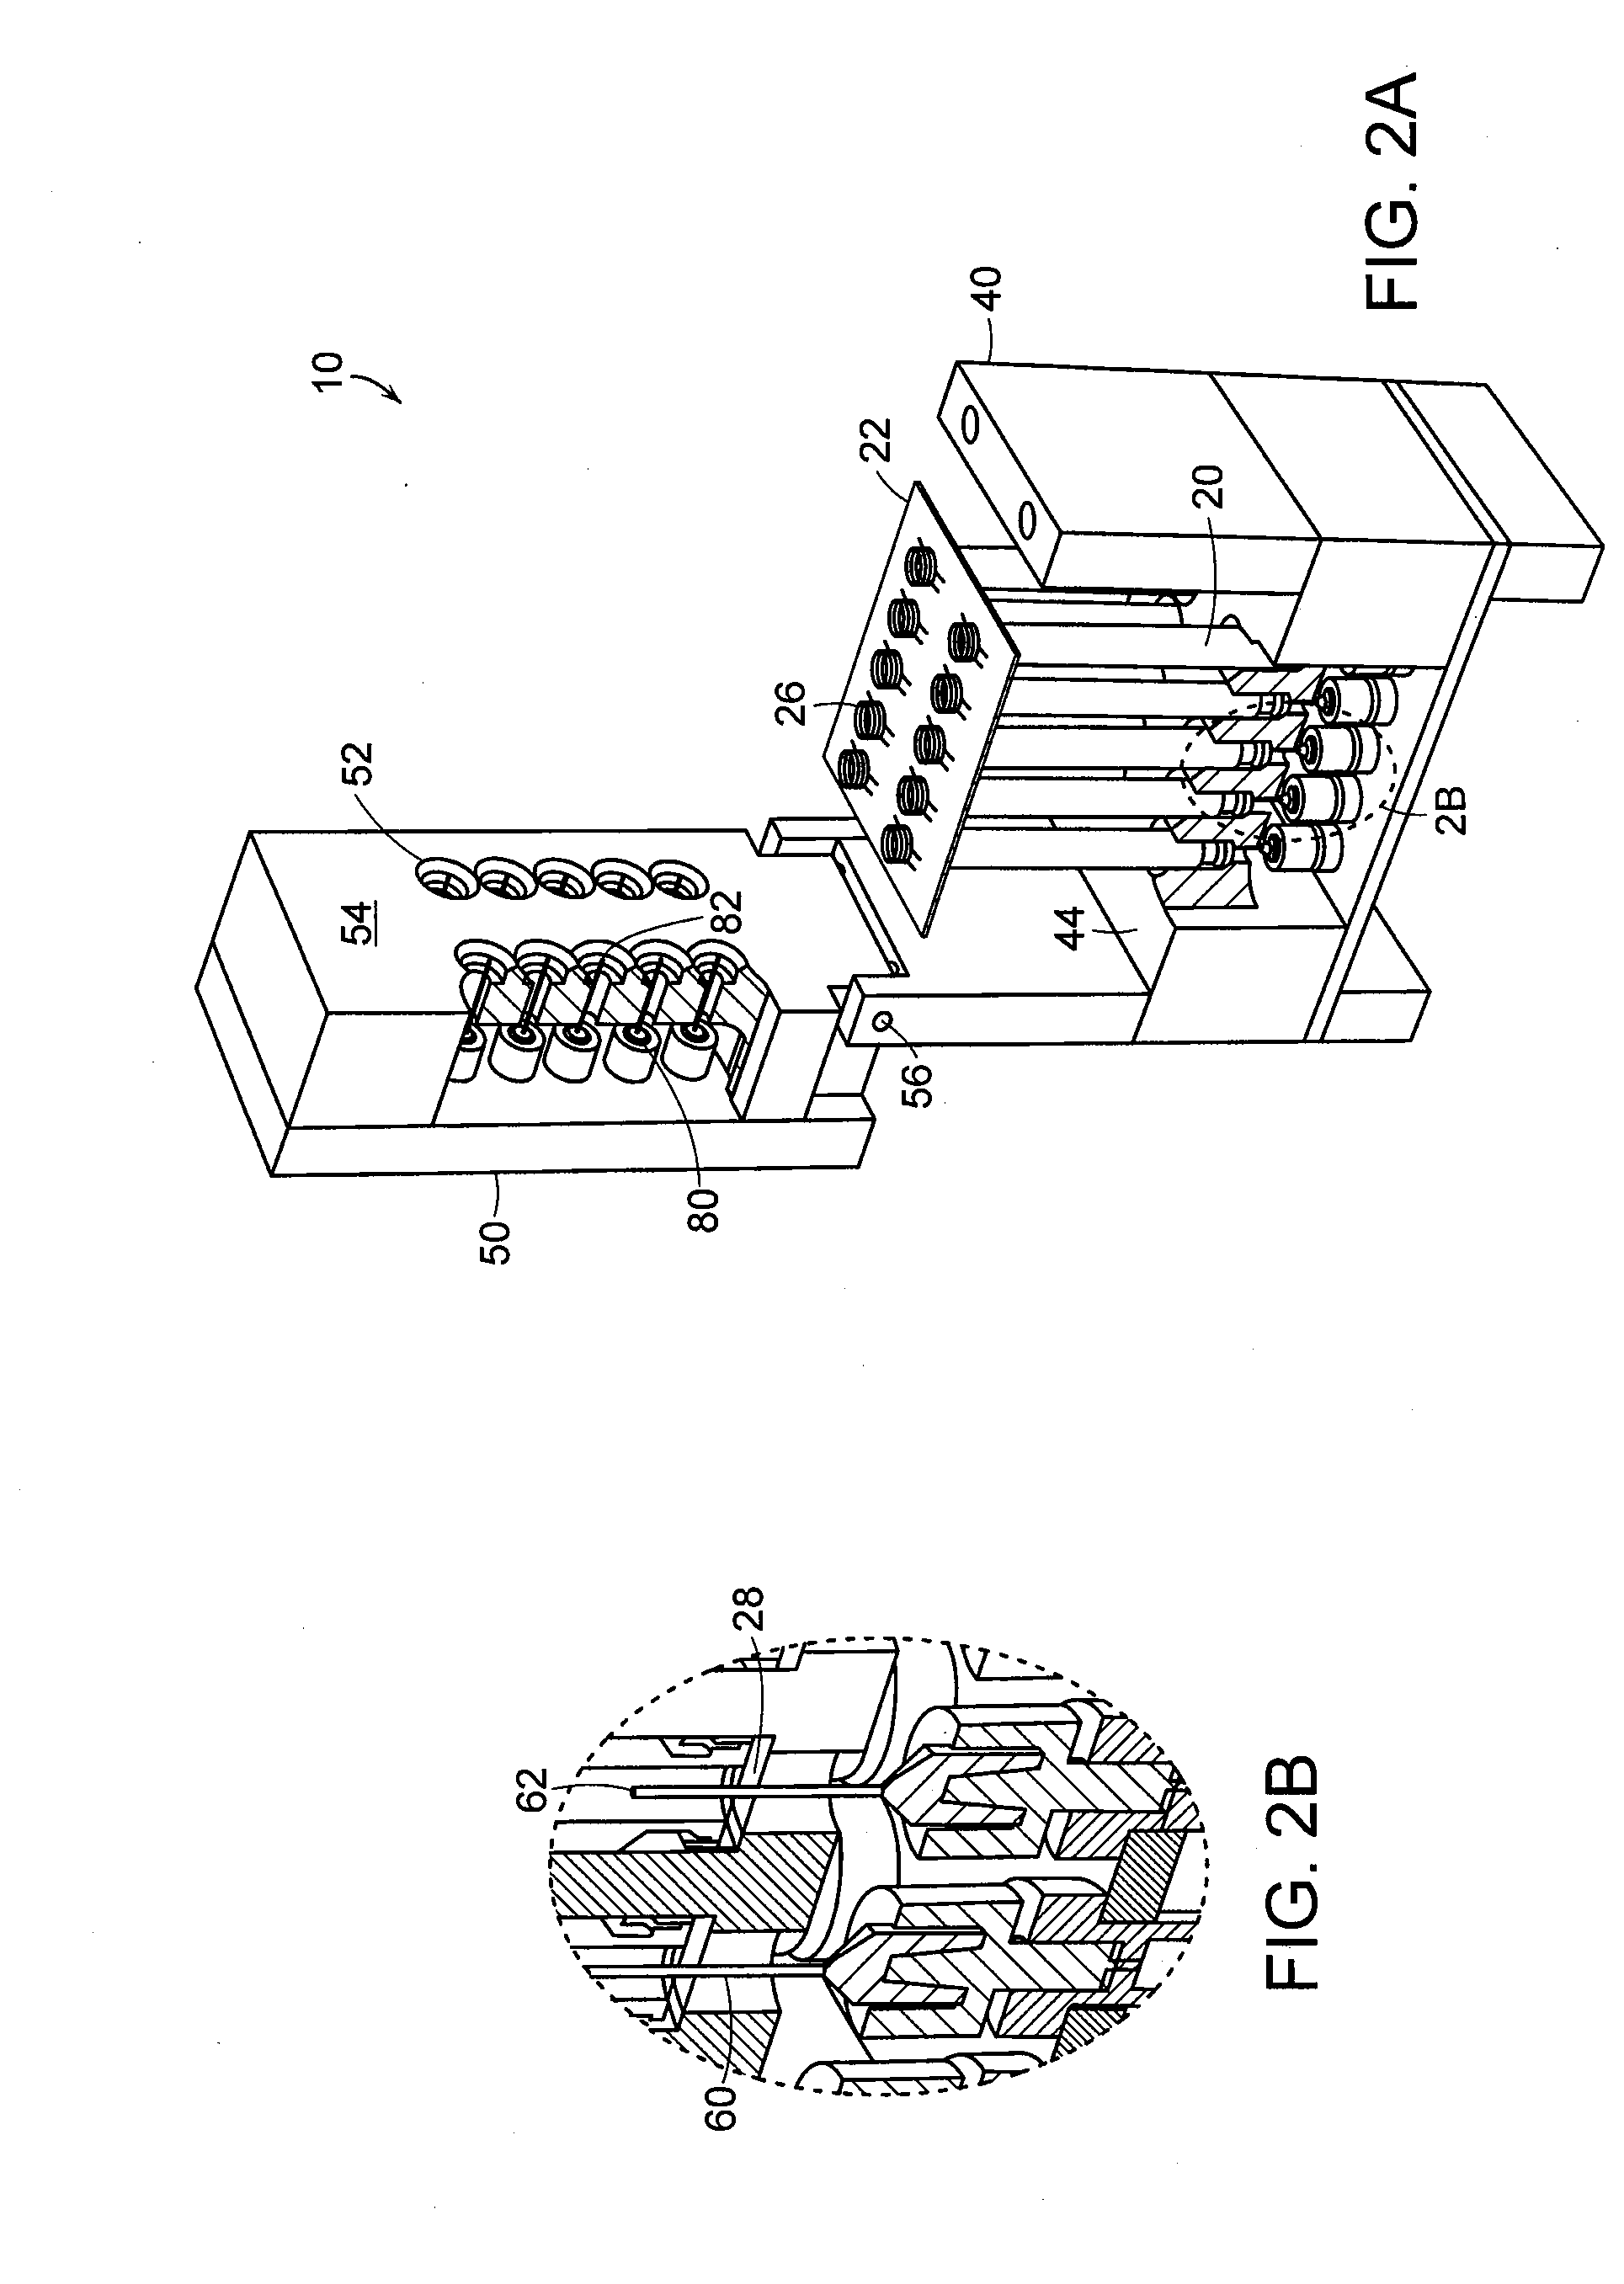 Liquid Handling System and Methods for Mixing and Delivering Liquid Reagents